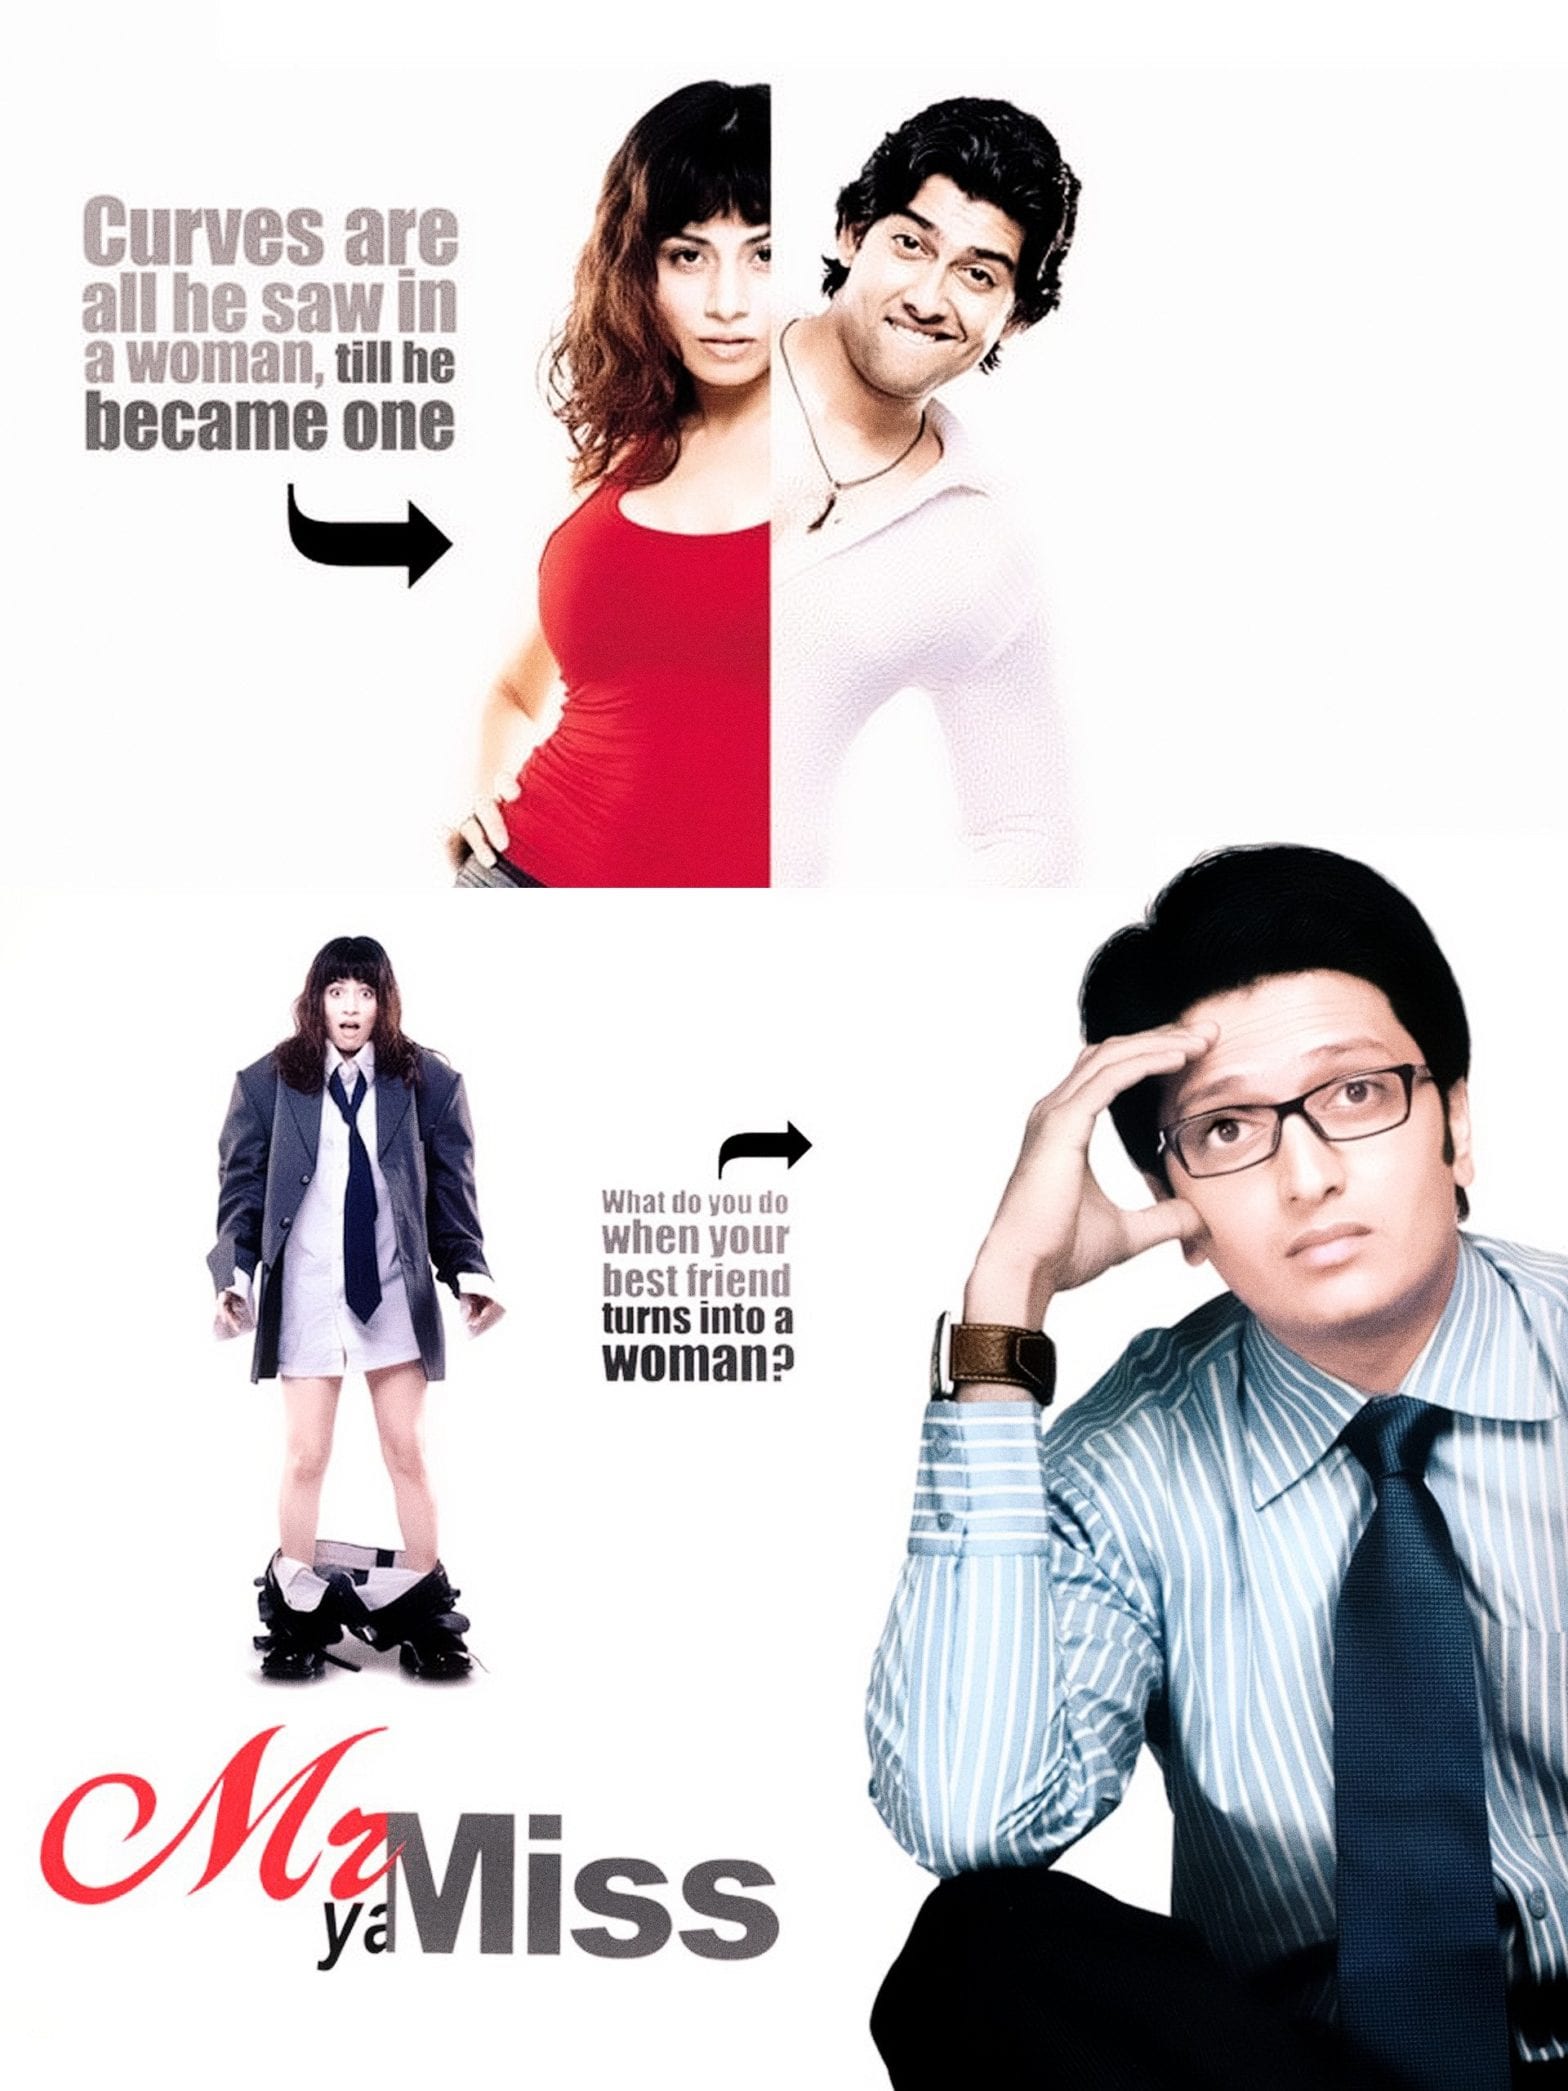 Poster for the movie "Mr Ya Miss"